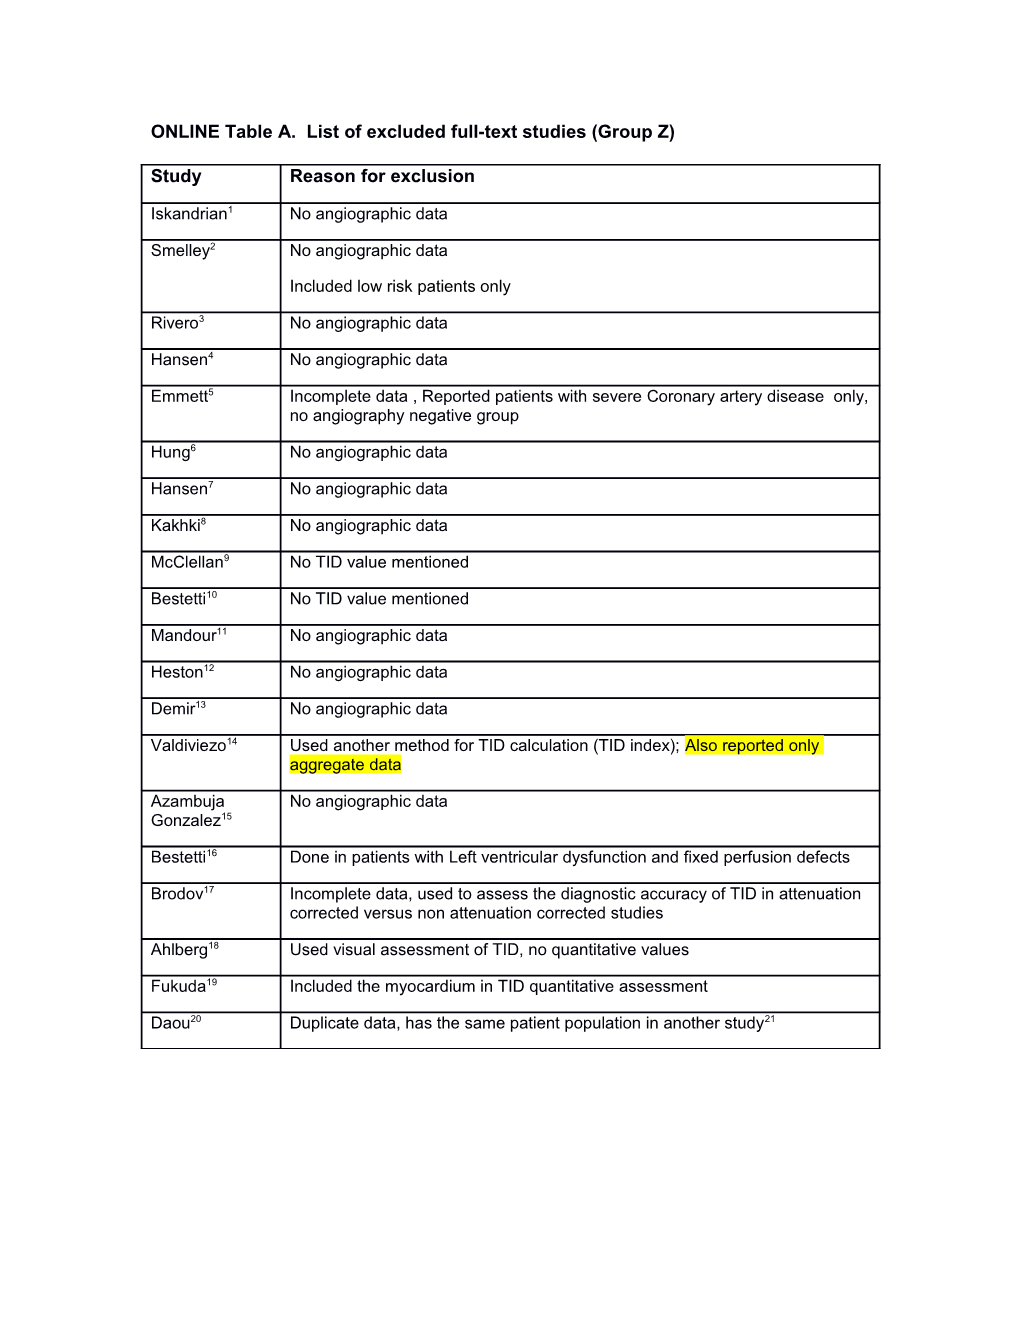 ONLINE Table A. List of Excluded Full-Text Studies (Group Z)